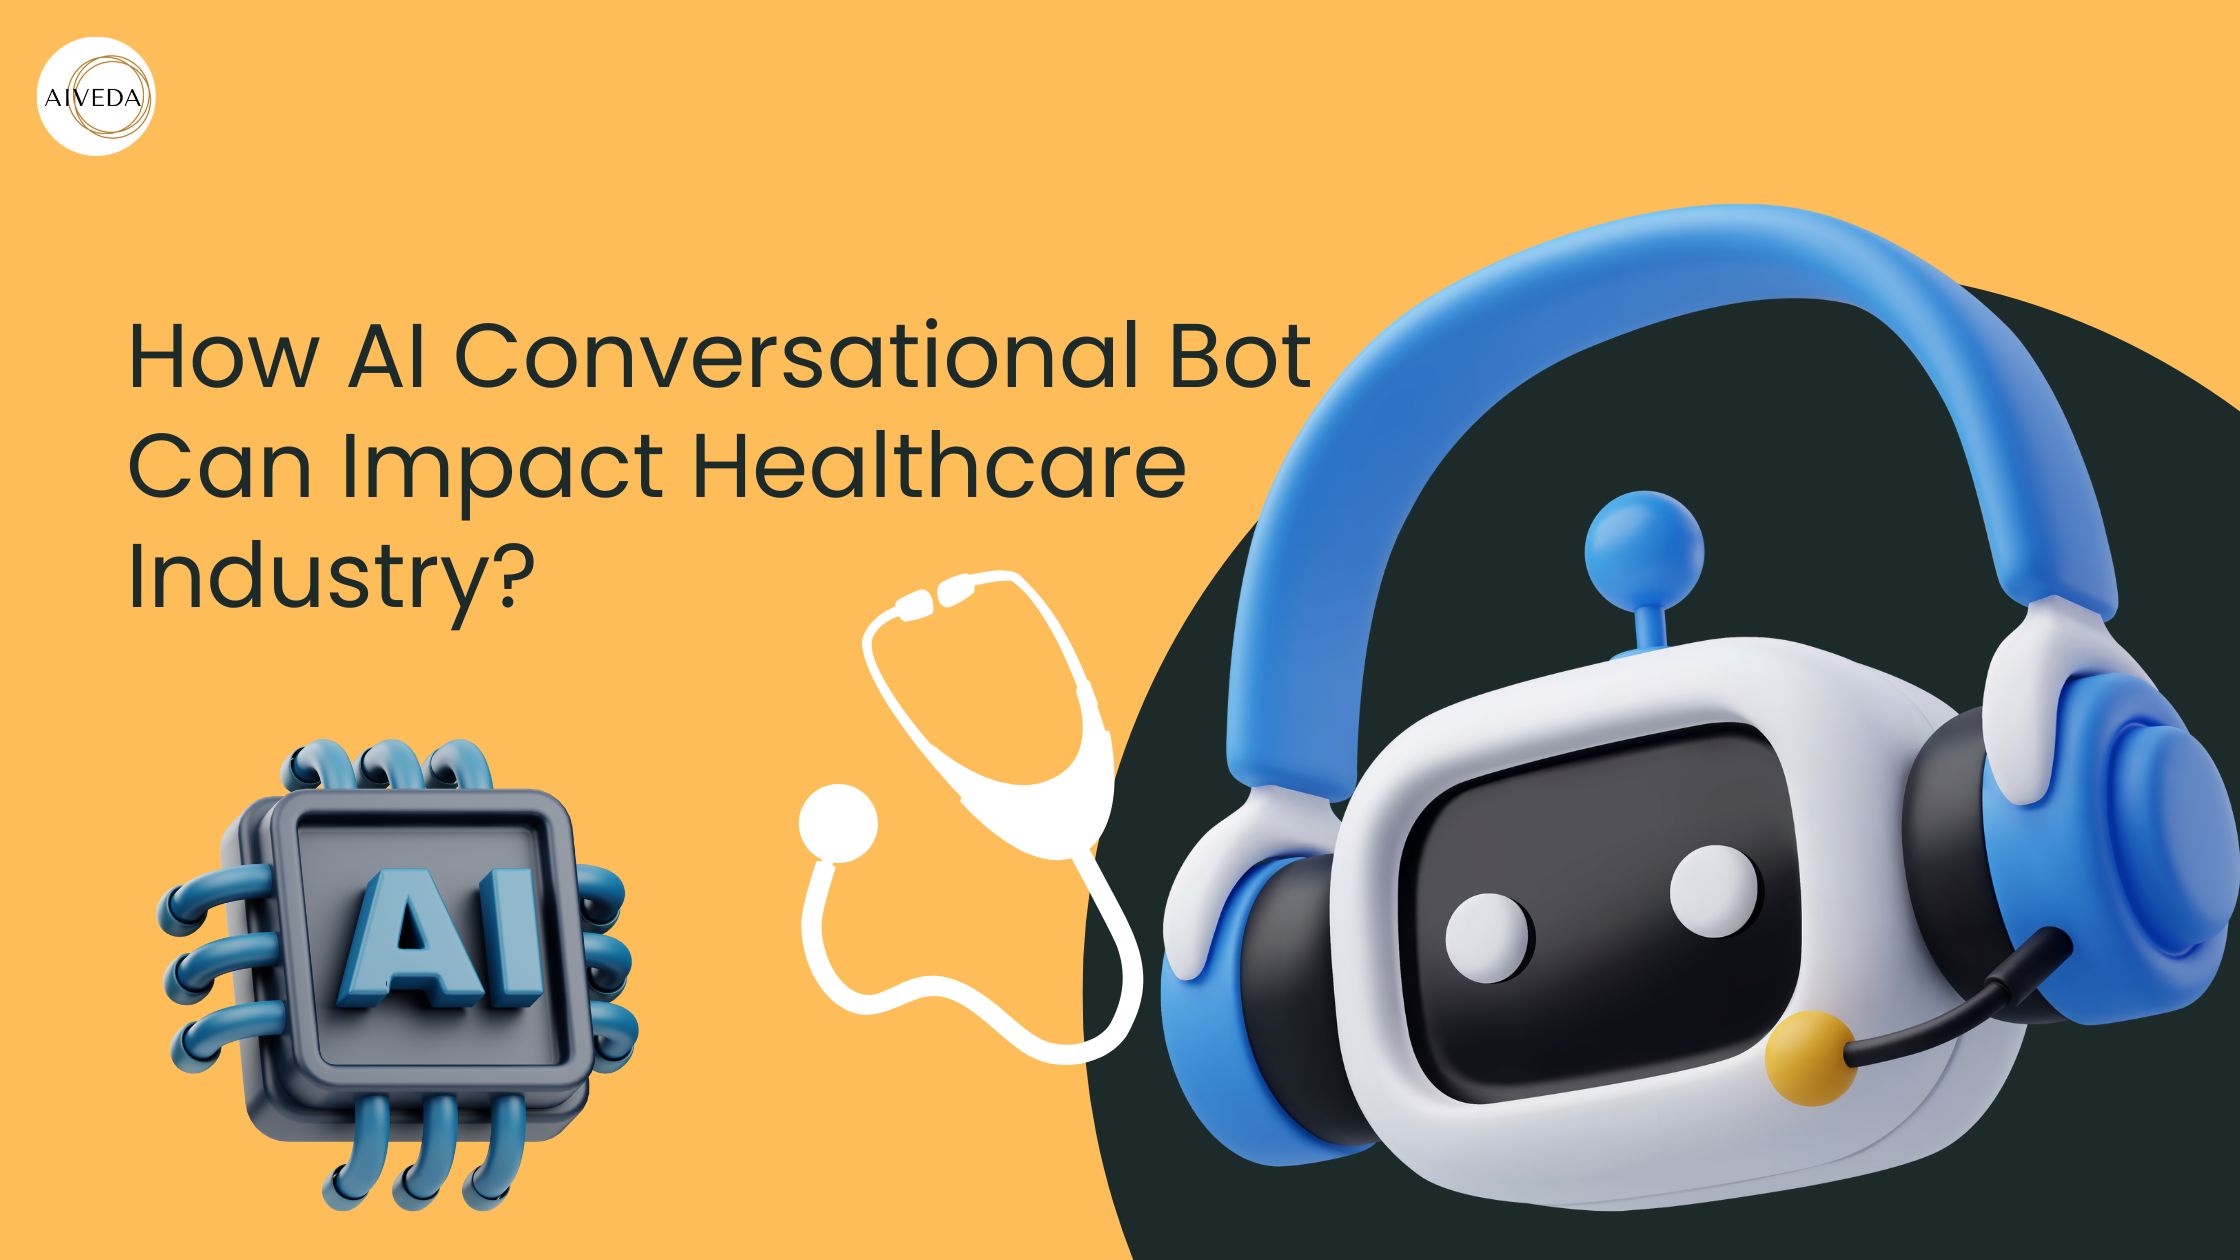 How AI Conversational Bot Can Impact Healthcare Industry